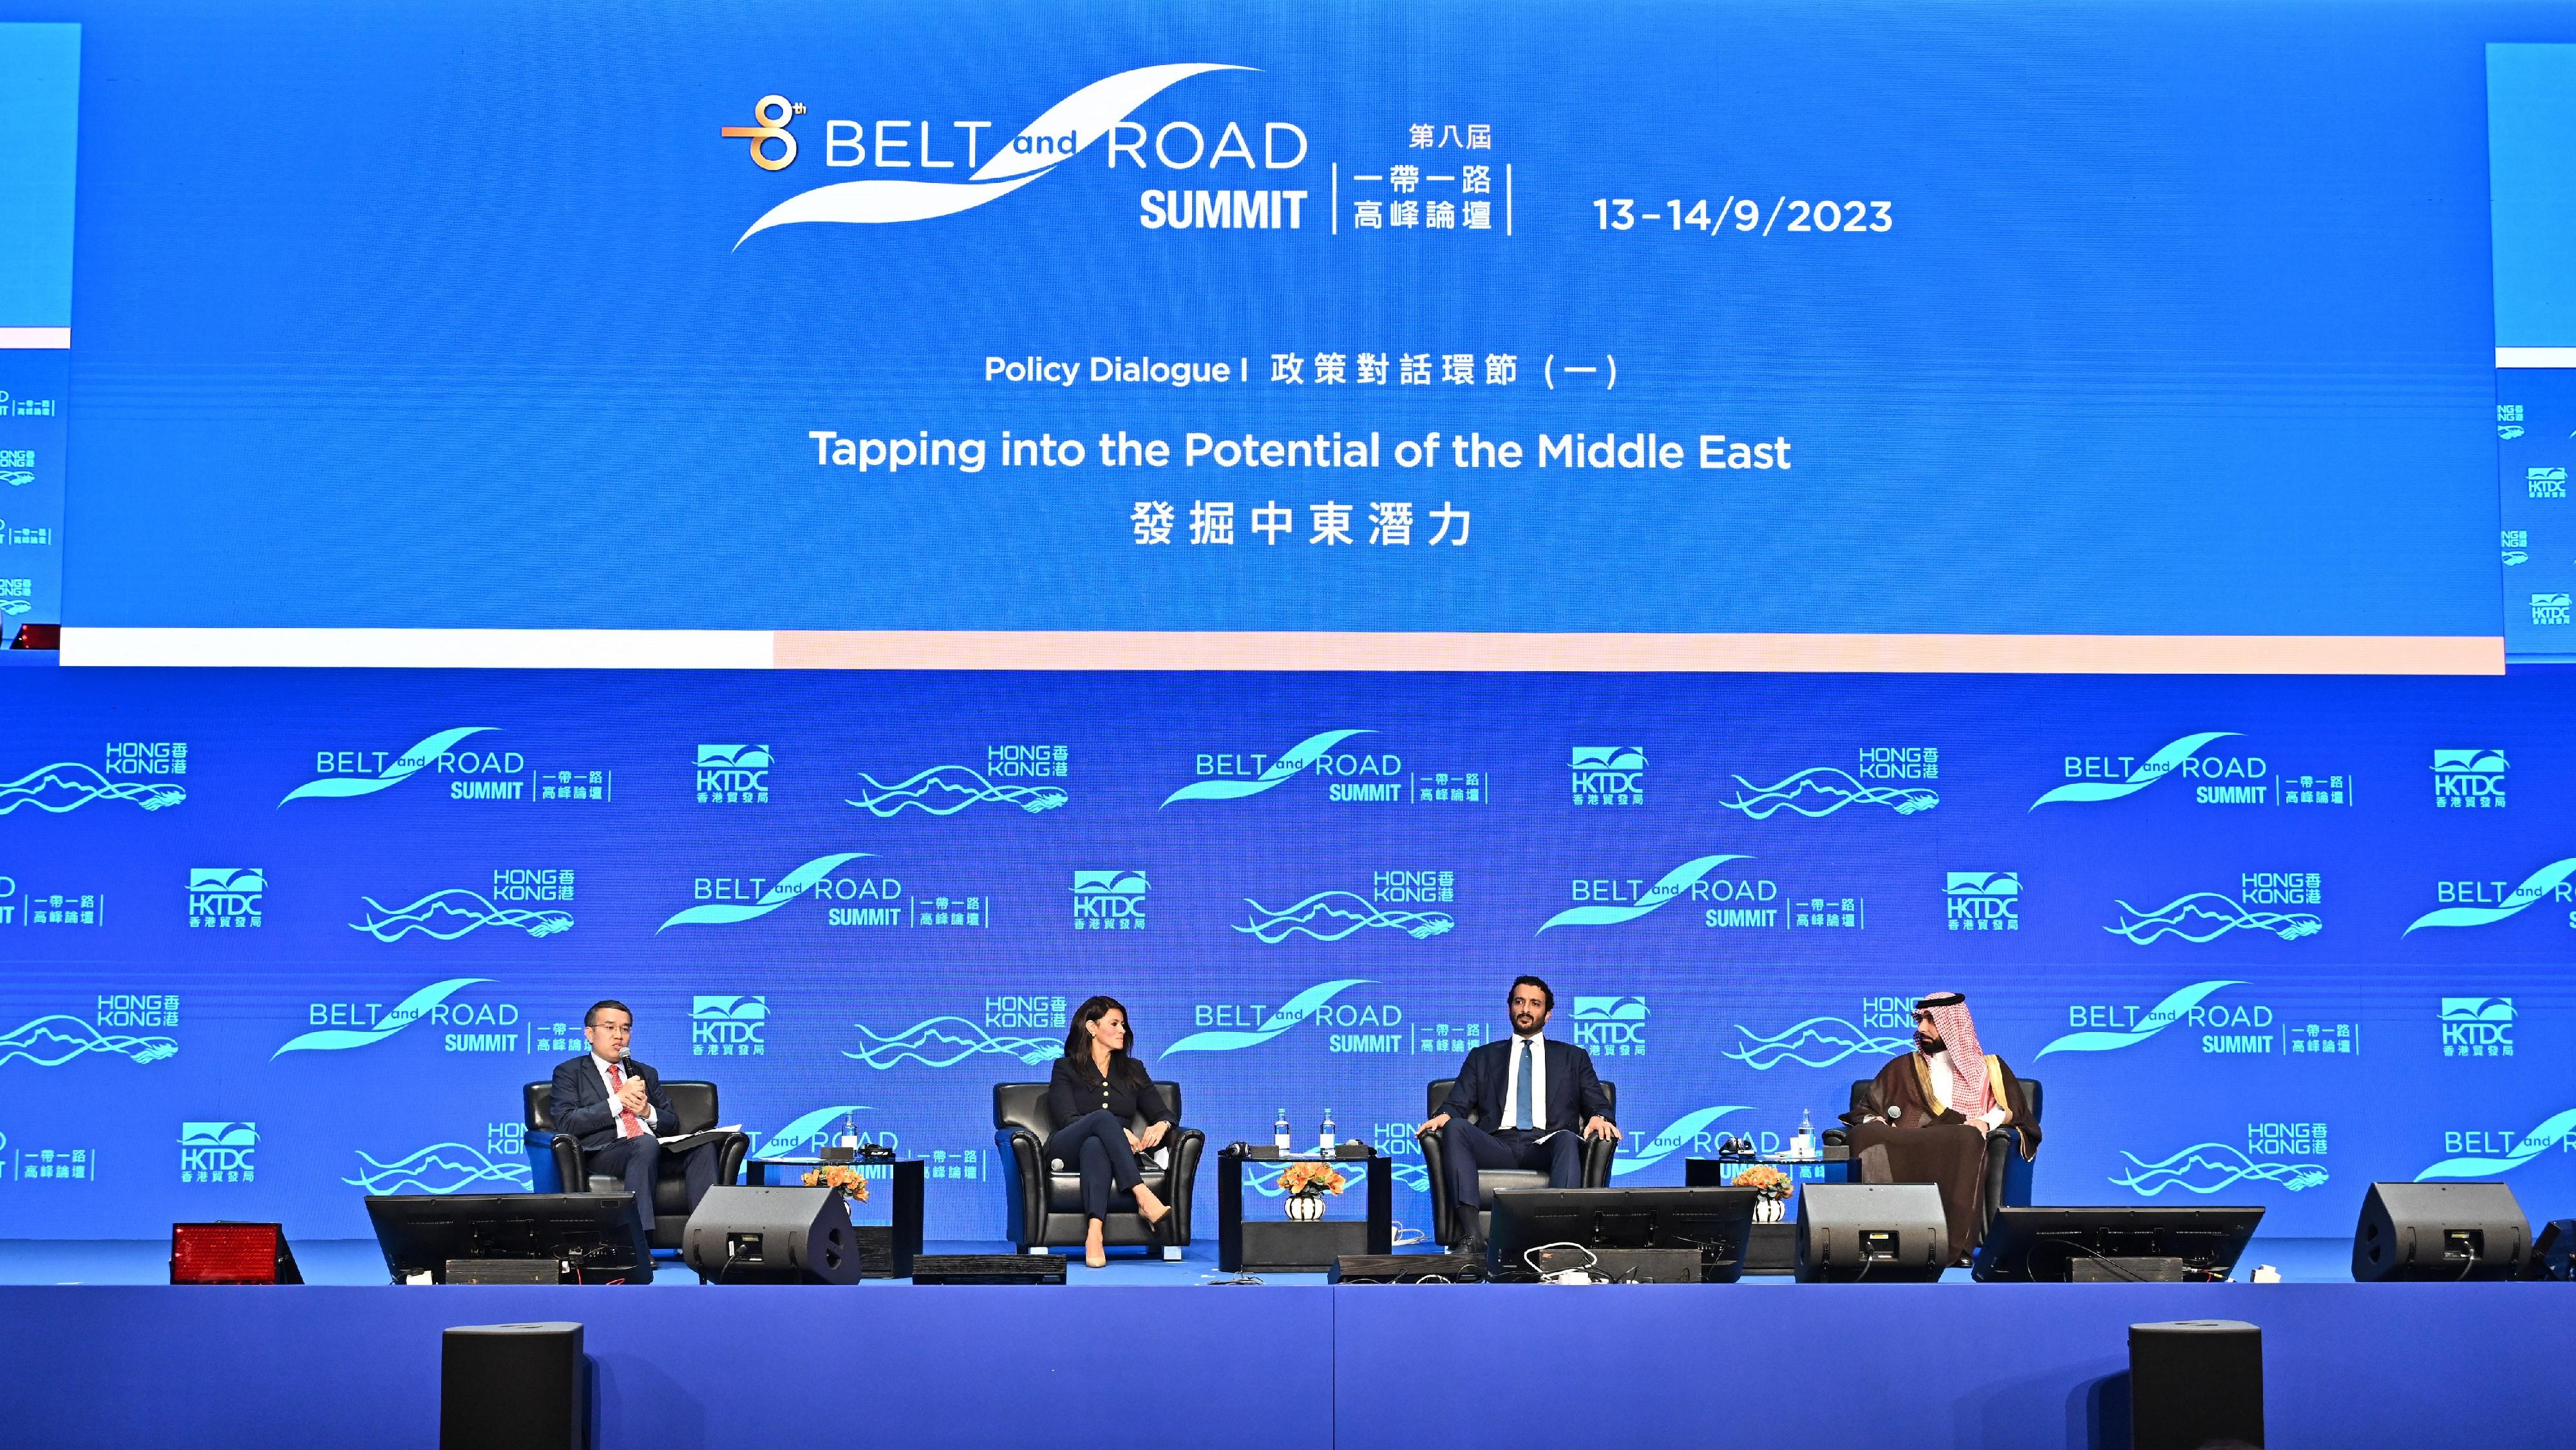 The eighth Belt and Road Summit opened yesterday (September 13). The Secretary for Financial Services and the Treasury, Mr Christopher Hui (first left), chaired the policy dialogue session titled "Tapping into the Potential of the Middle East" to explore effective ways to tap the Middle East markets, fostering complementarity, mutual benefits and collective development. The Advisor in the General Secretariat of the Council of Ministers, Saudi Arabia, Mr Fahd bin Abdulmohsan Al-Rasheed (first right); the Minister of Economy of the United Arab Emirates, Mr Abdulla Bin Touq Al Marri (second right); and the Minister, Ministry of International Cooperation, Egypt, Dr Rania A Al-Mashat (second left), joined the discussion.